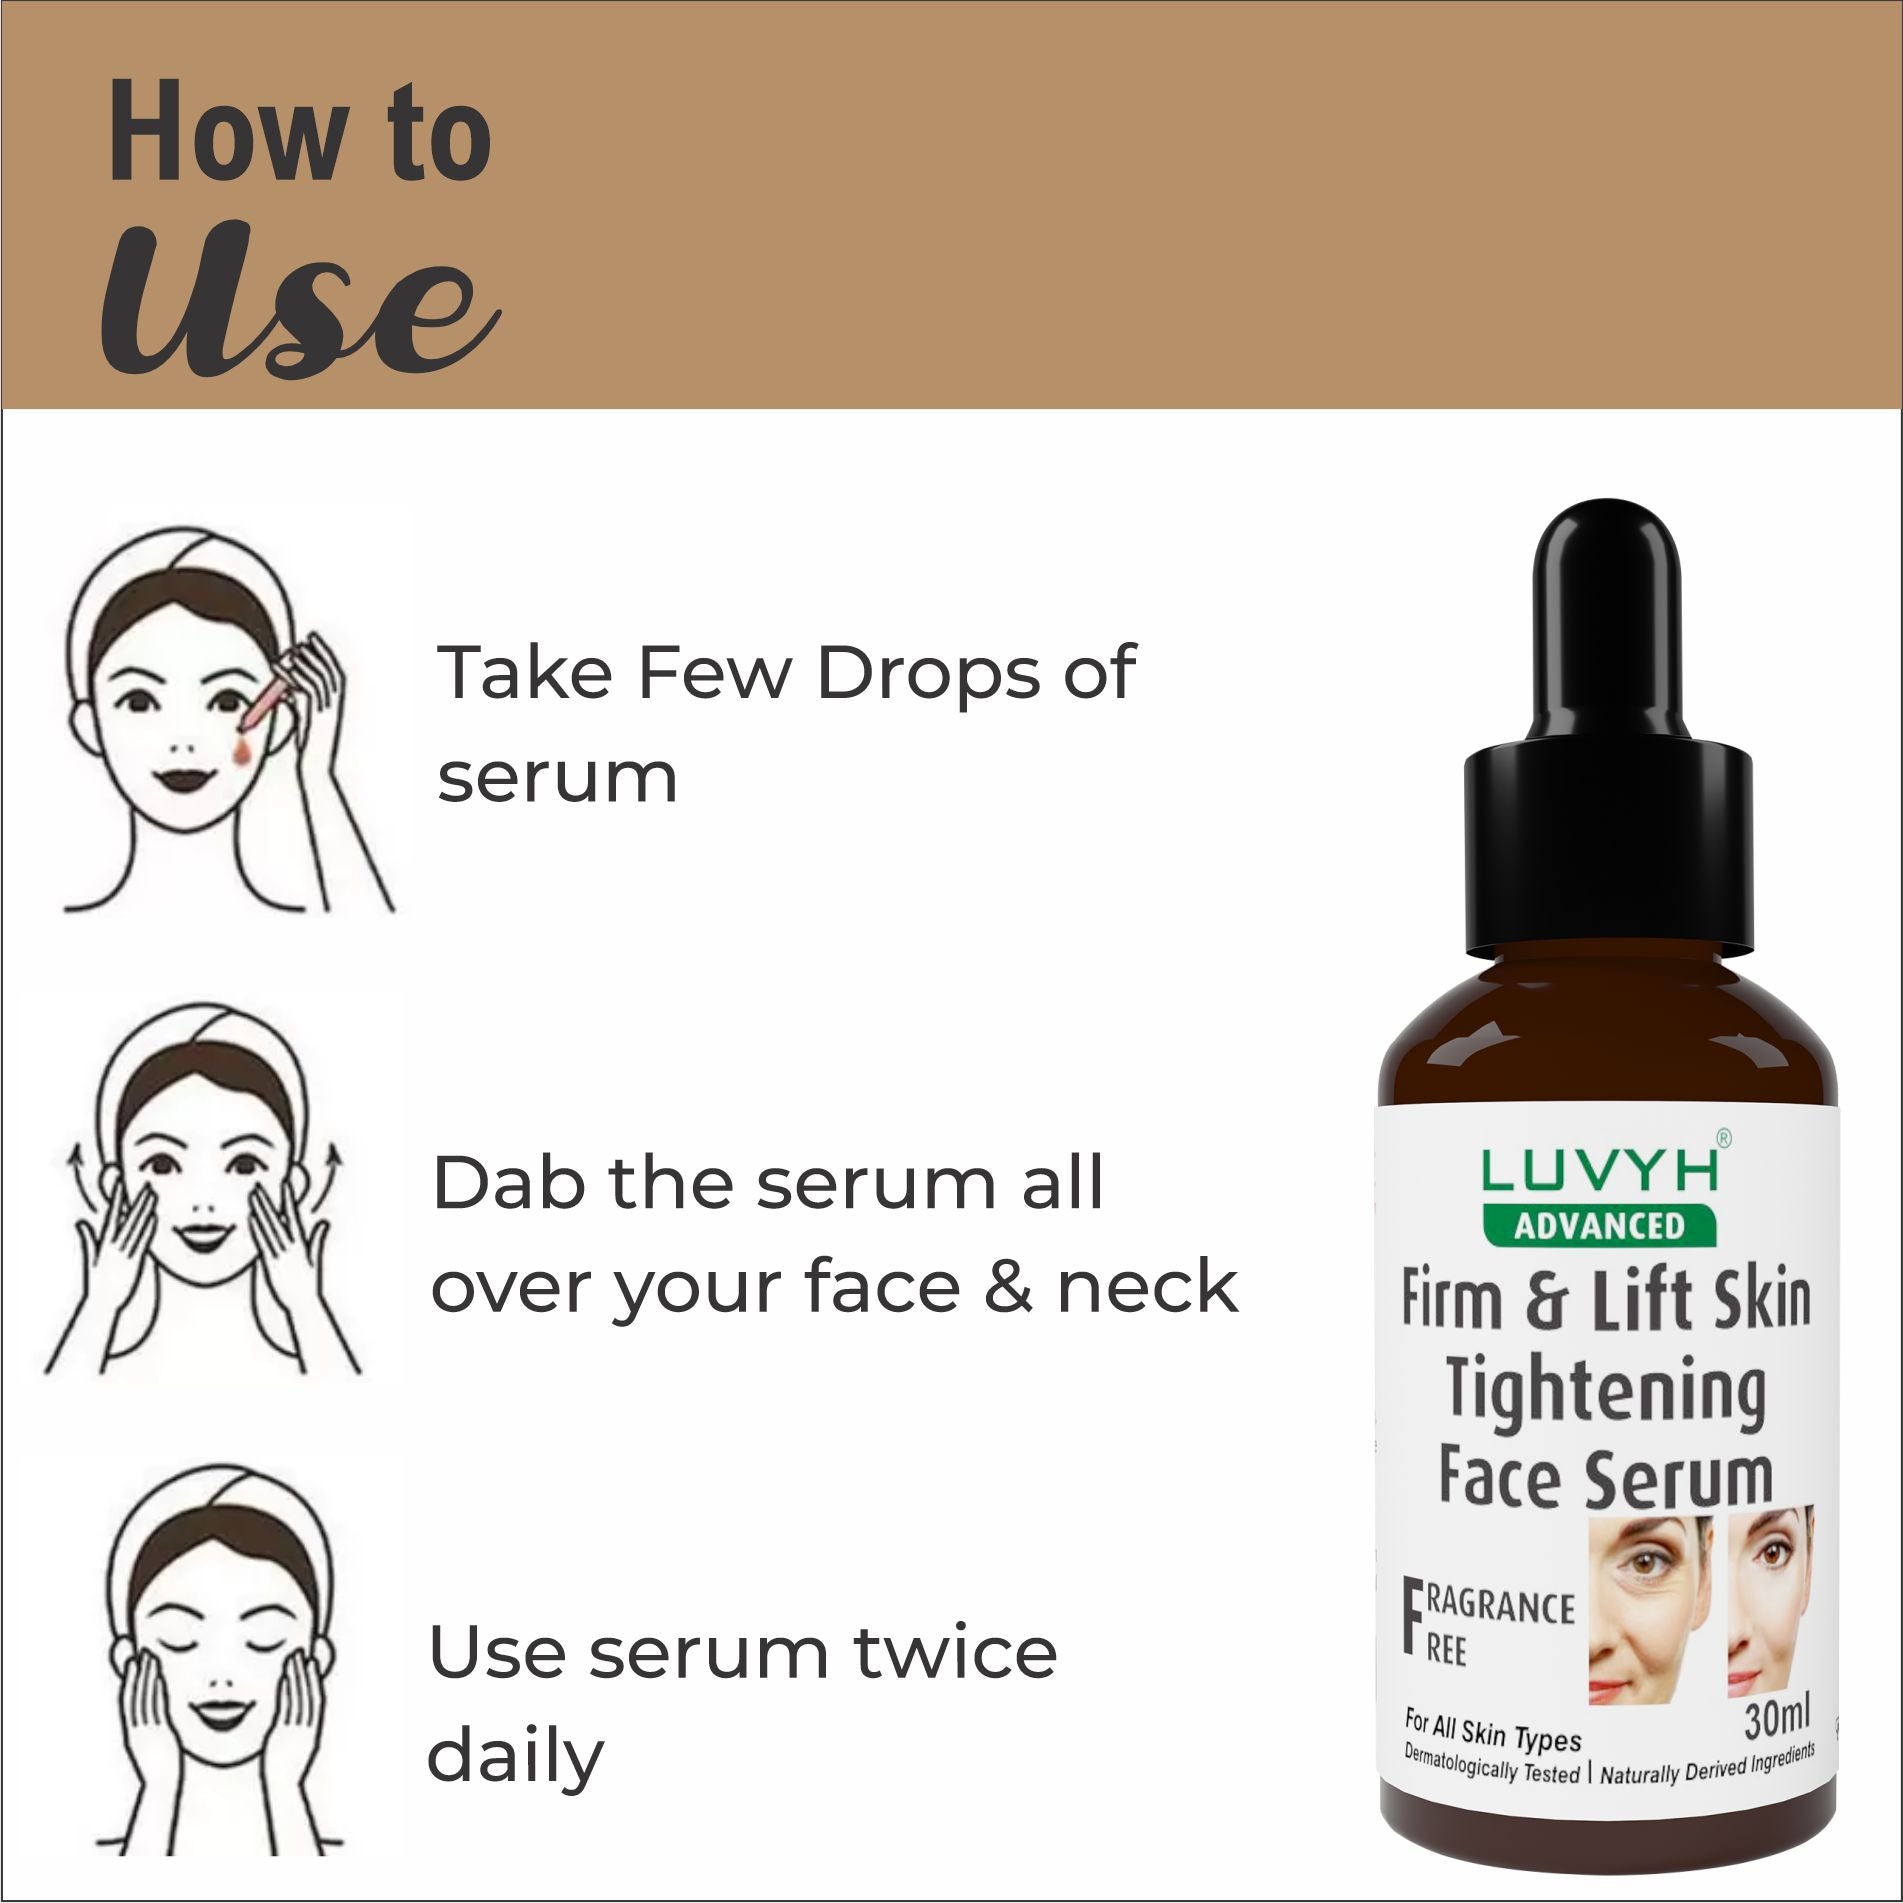 How to use  Firm & Lift Skin Tightening Face  Serum 